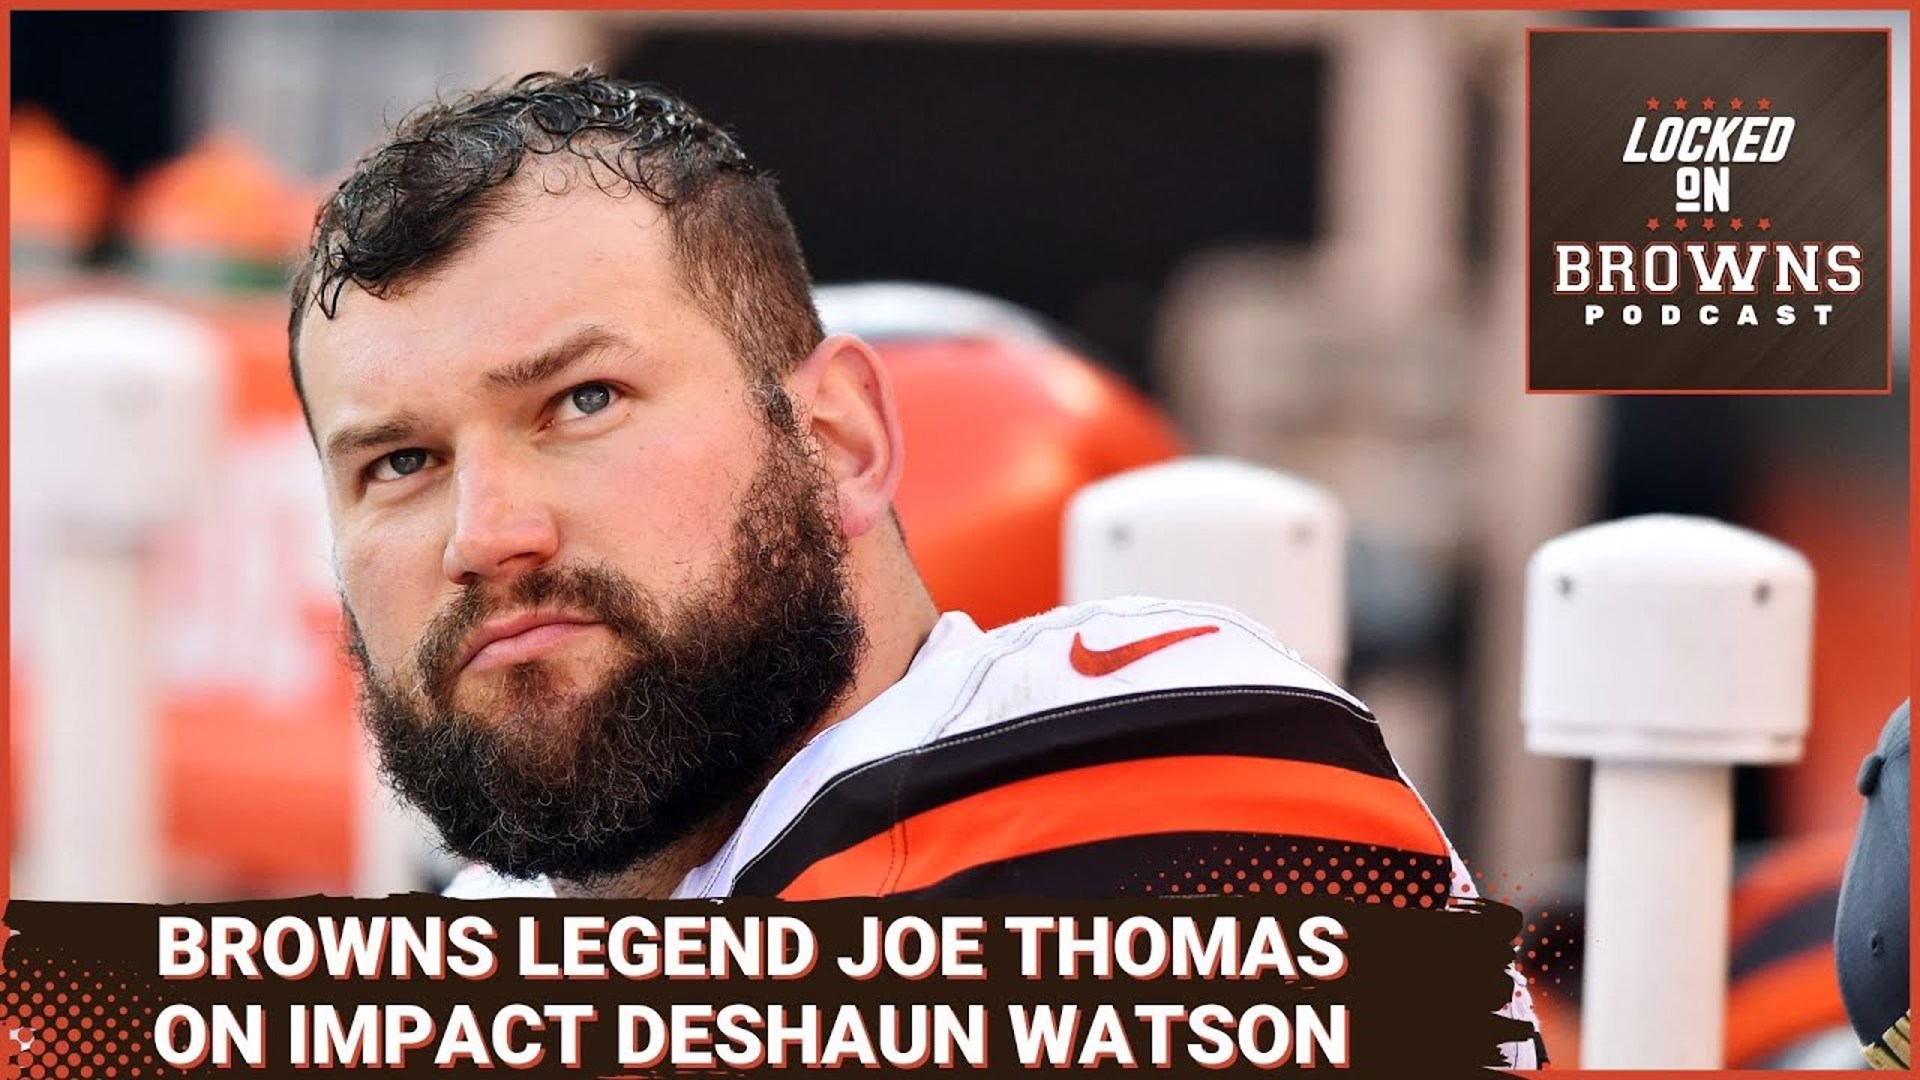 Thomas has been around long enough to know the importance of a good quarterback, and he's impressed with Watson's abilities thus far.